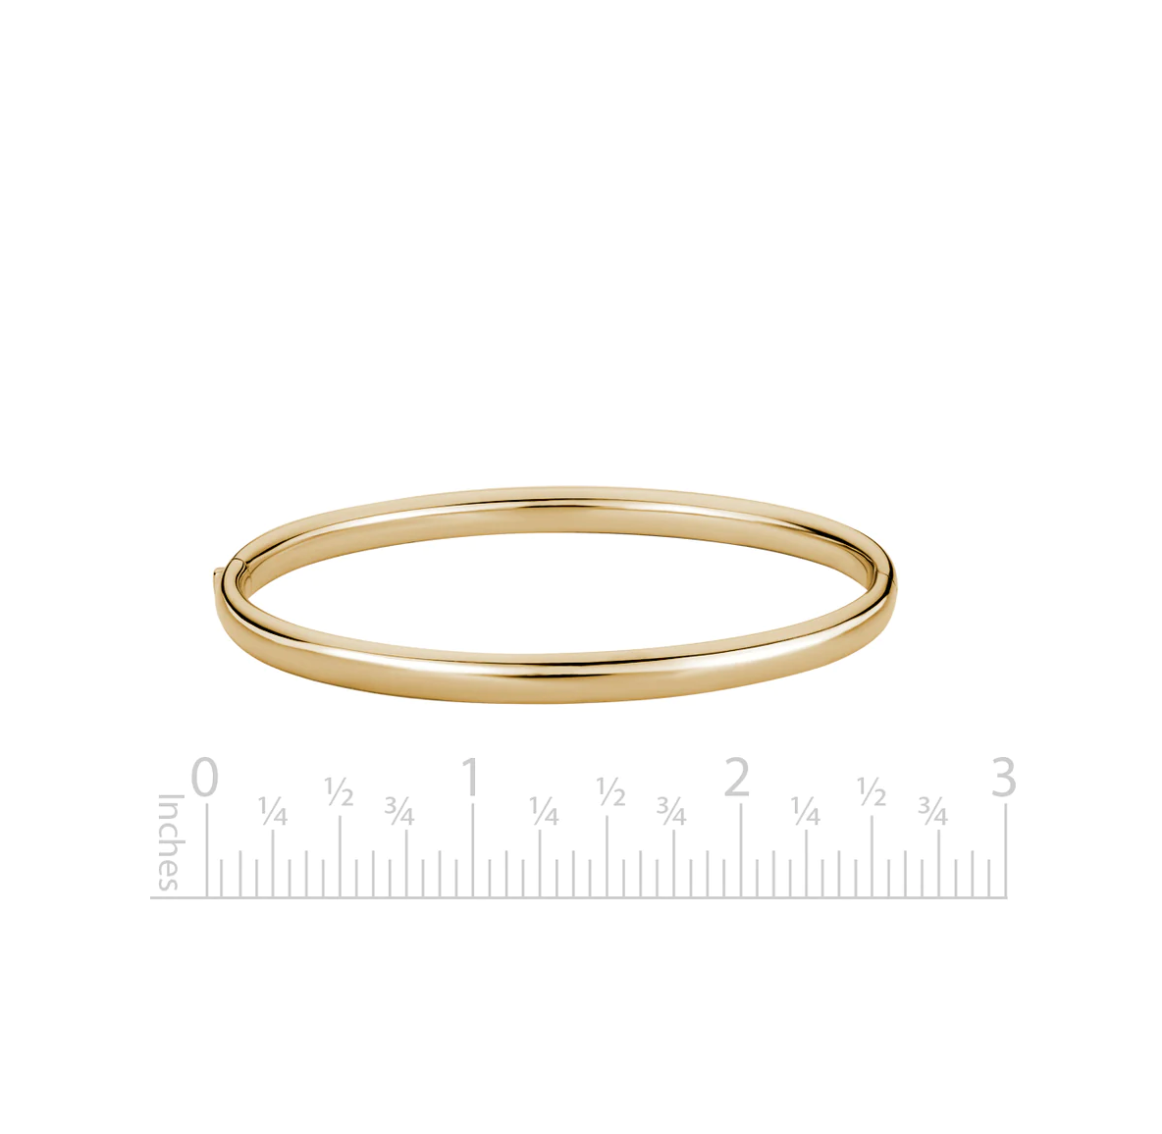 Stackable Rounded Hinged Bangle in 14k Yellow Gold - 5mm width